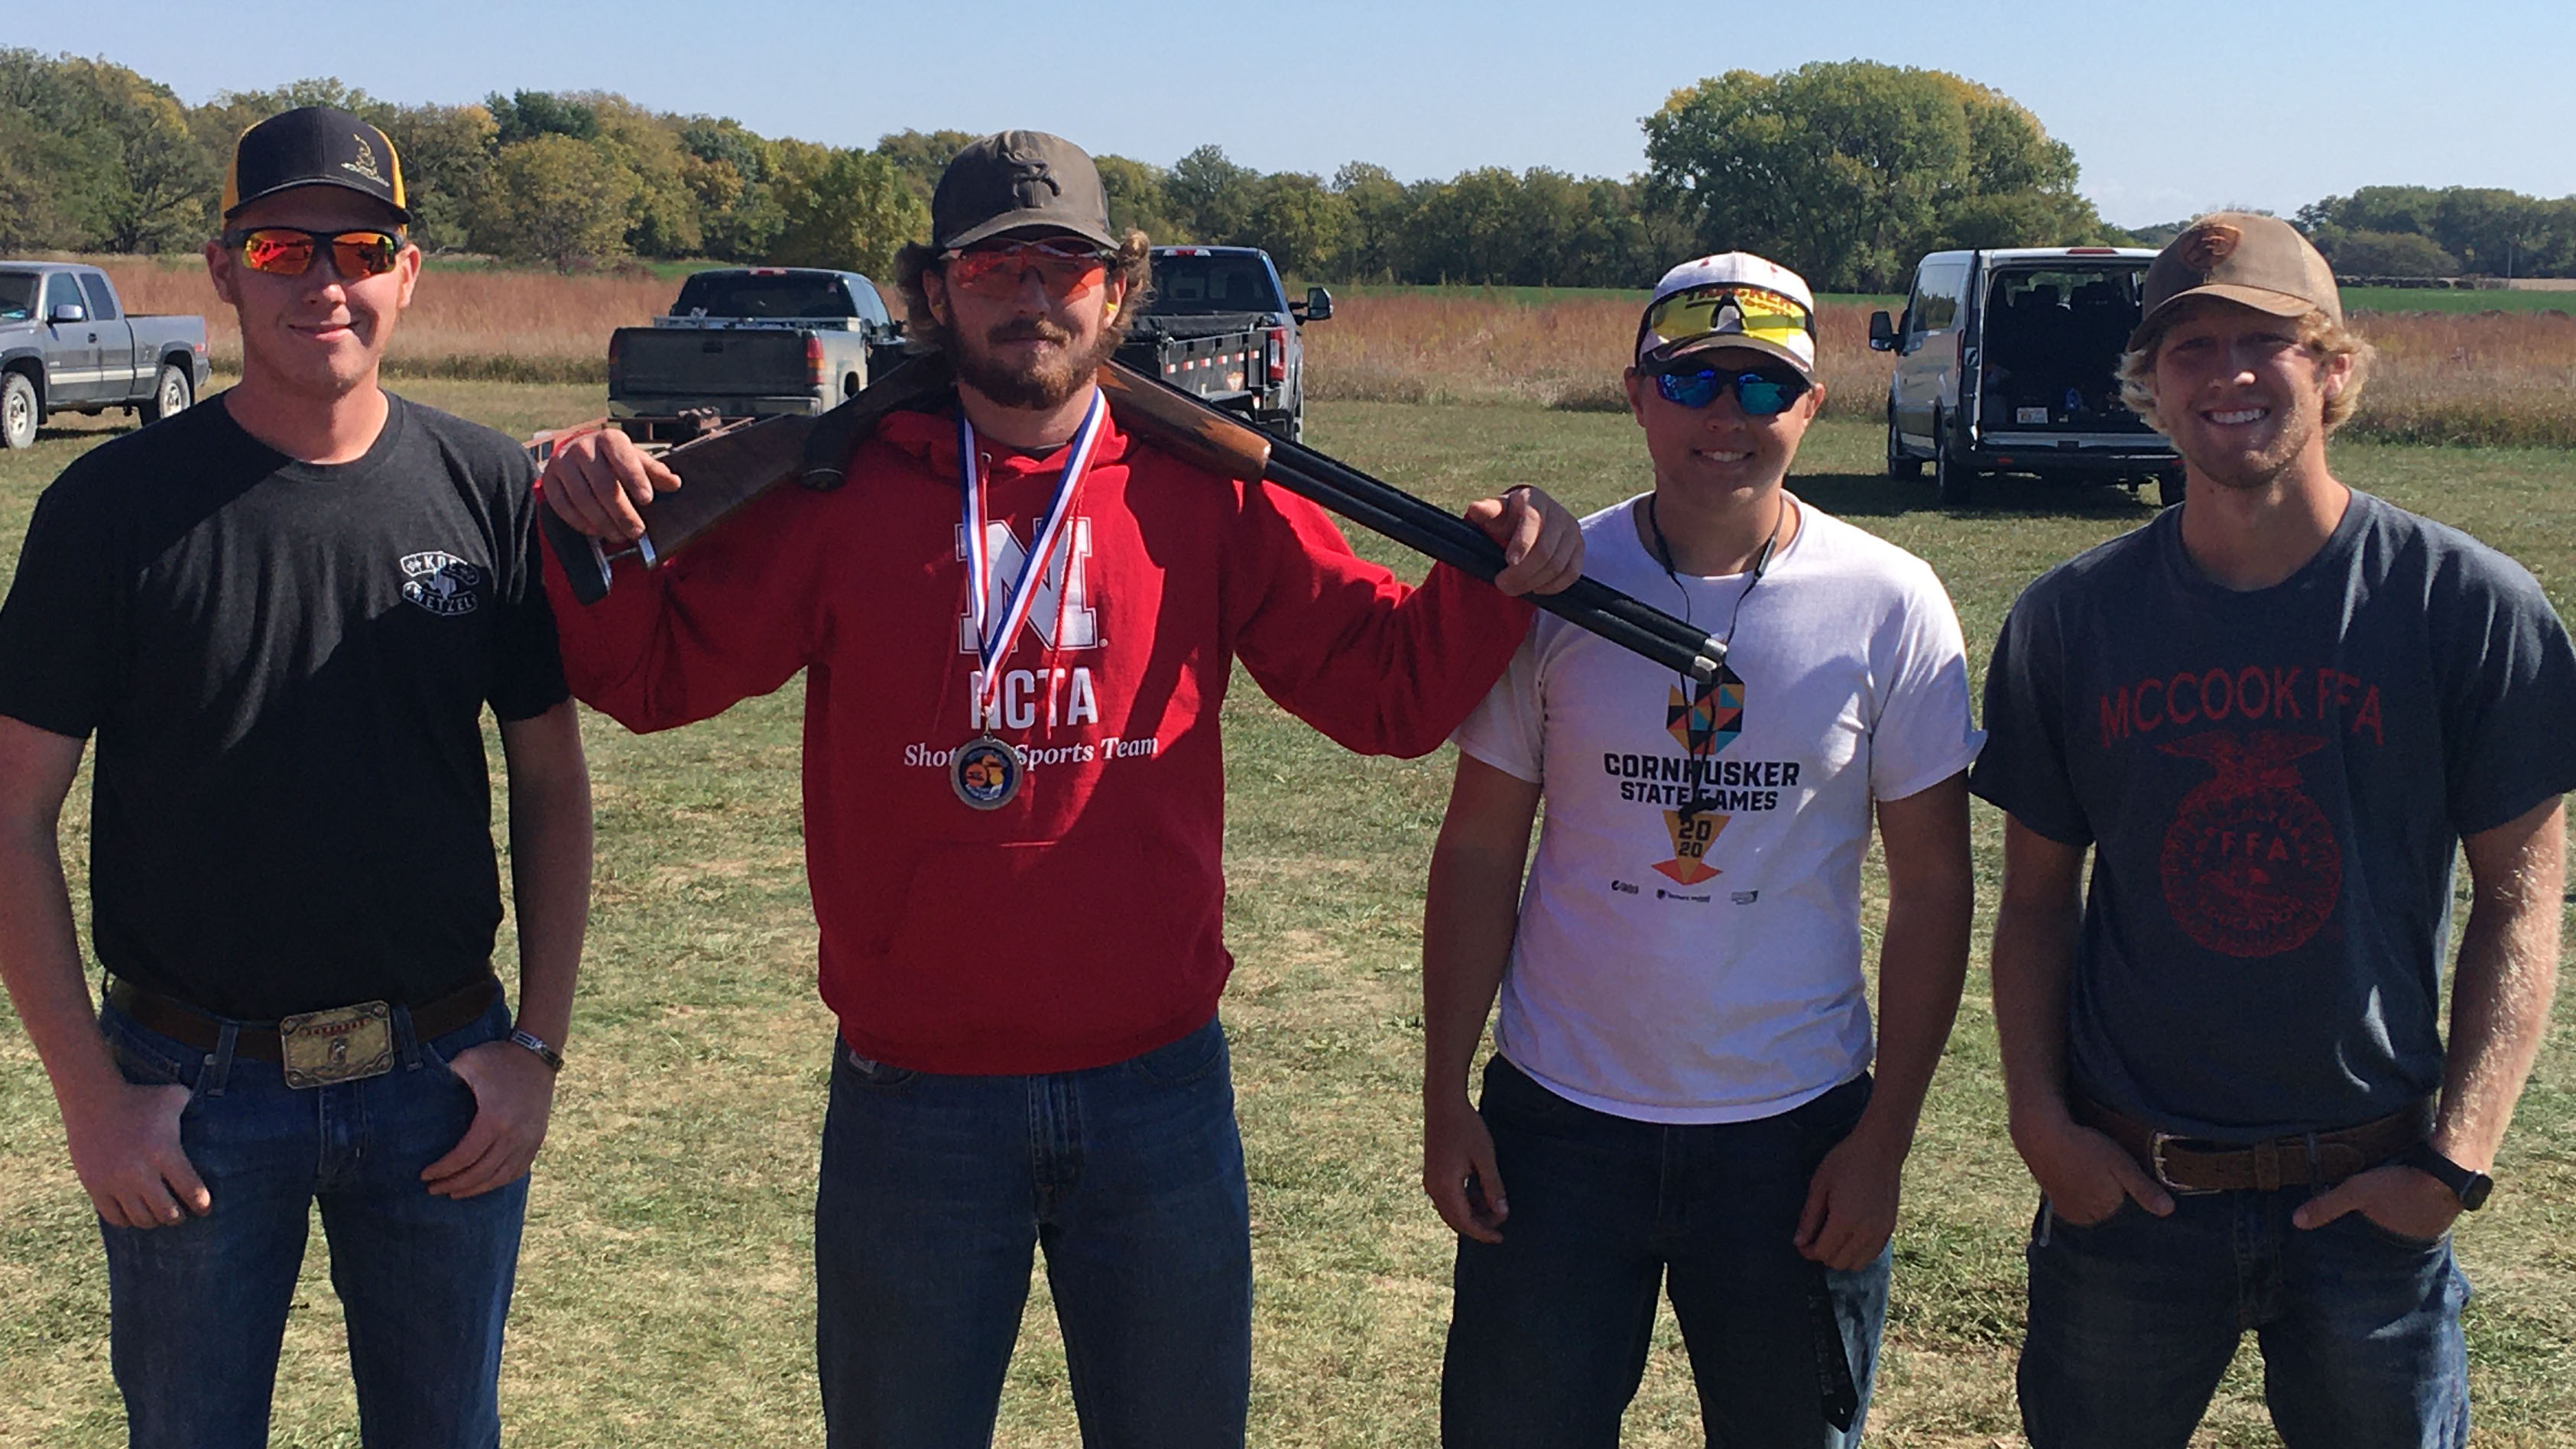 NCTA Aggies competed Oct. 3-4 at Oak Creek Sporting Club in Brainard. From left, Kamren Sitzman of McCook, Colby Mitchell of Burwell who was second place overall, Kaden Bryant of Firth, and Trey Barnhart of McCook. (Alan Taylor / NCTA Photo)